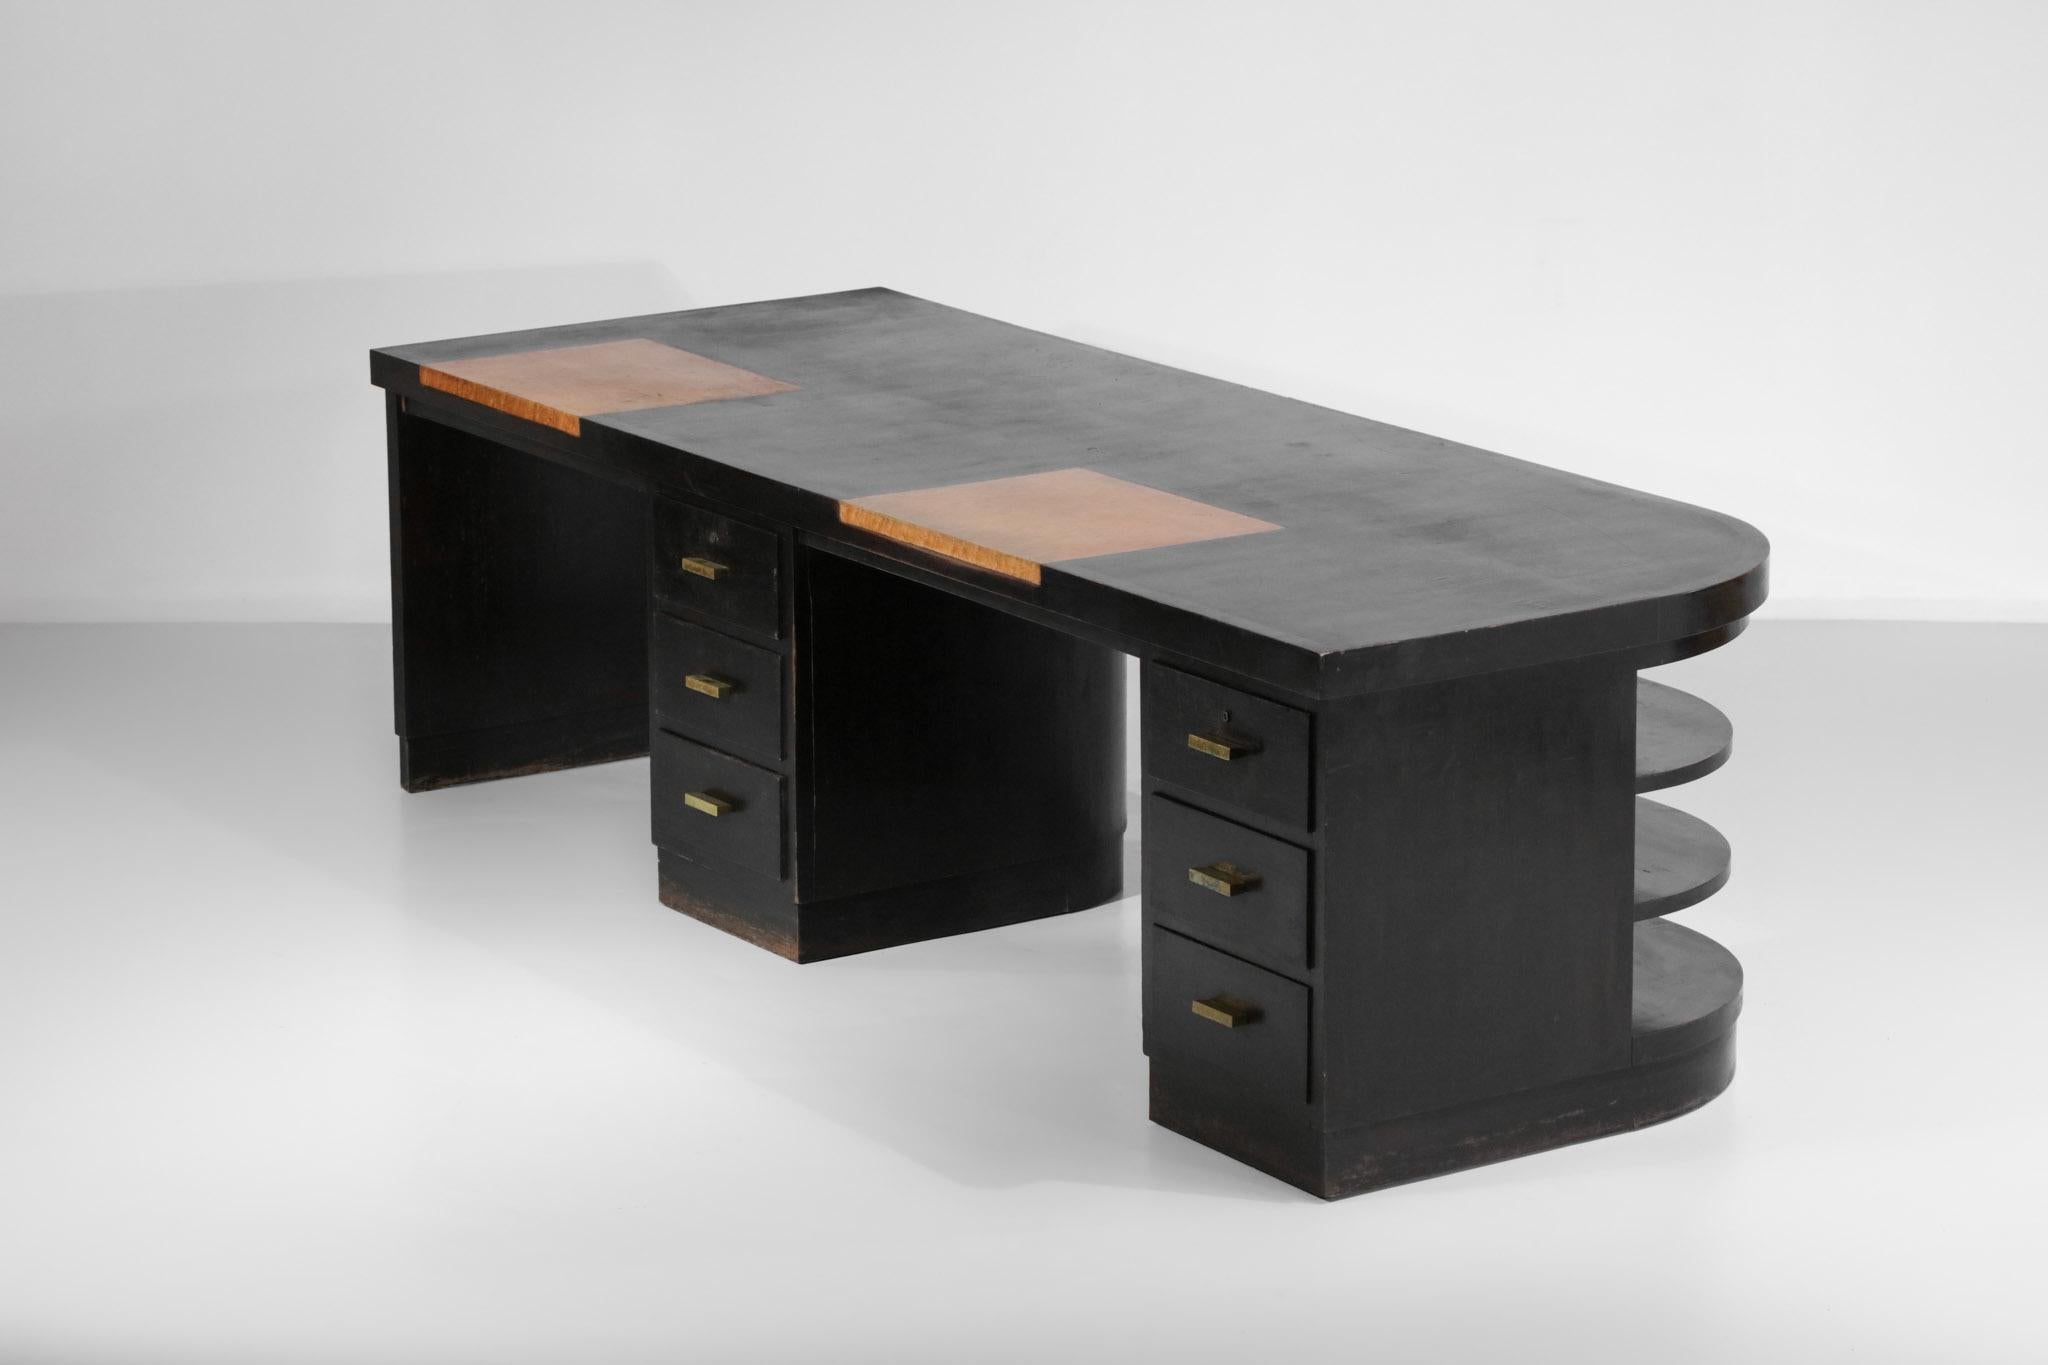 Large modernist two-seater desk from the 1940s by Grenoble architect Pierre Pouradier Duteil. Structure in solid oak wood stained in black and two burr-wood desk legs in lemon tree. This double desk is composed of two columns of three drawers with